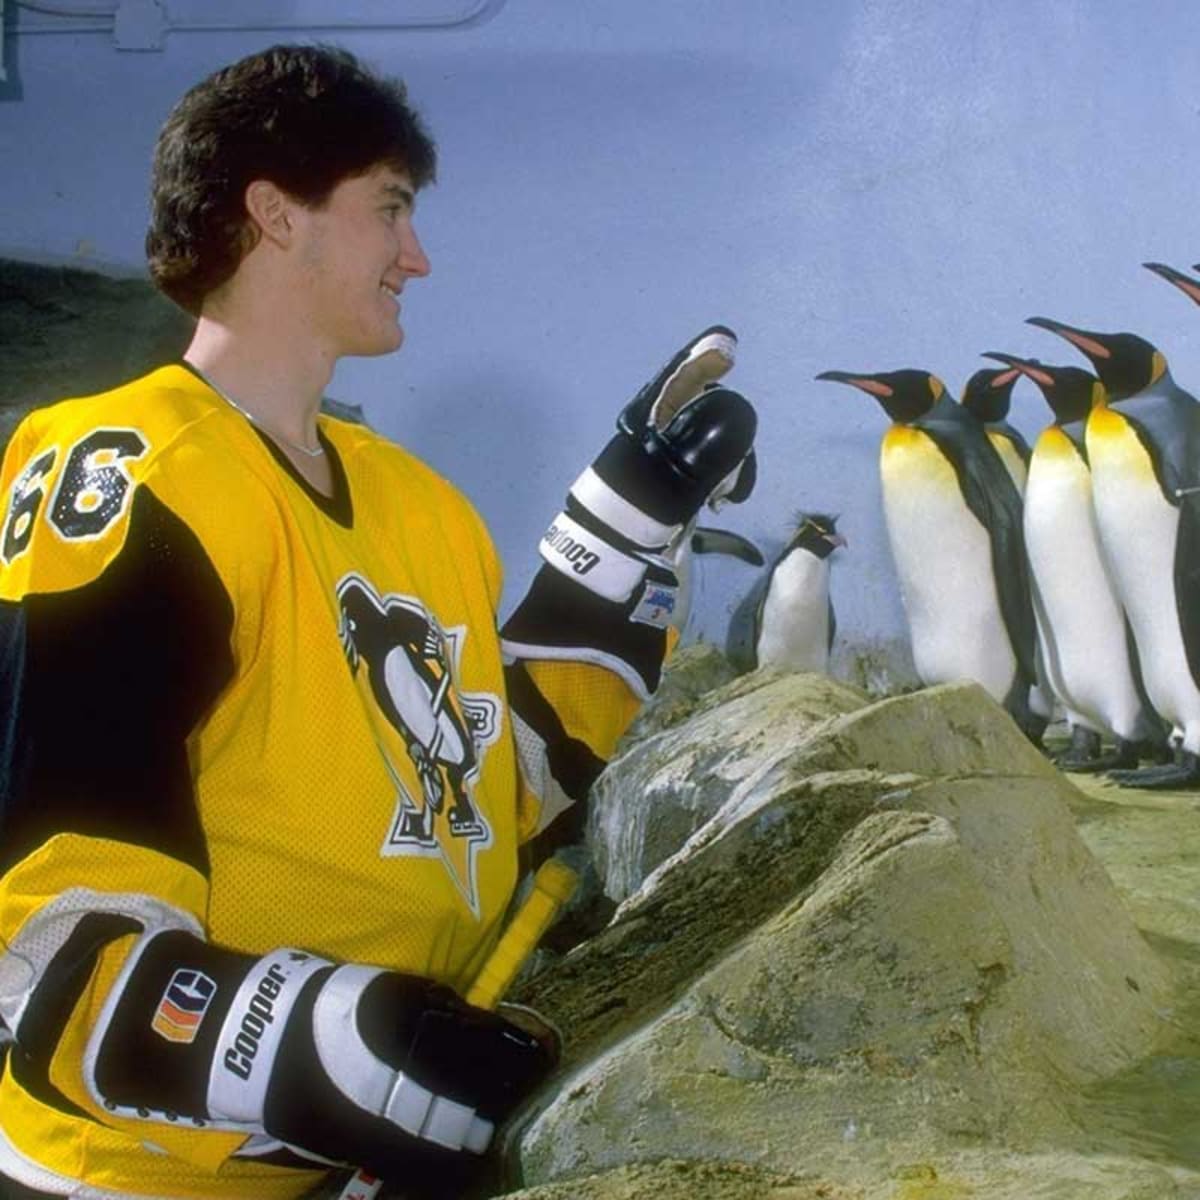 People still love him': In hometown Montreal, Mario Lemieux's